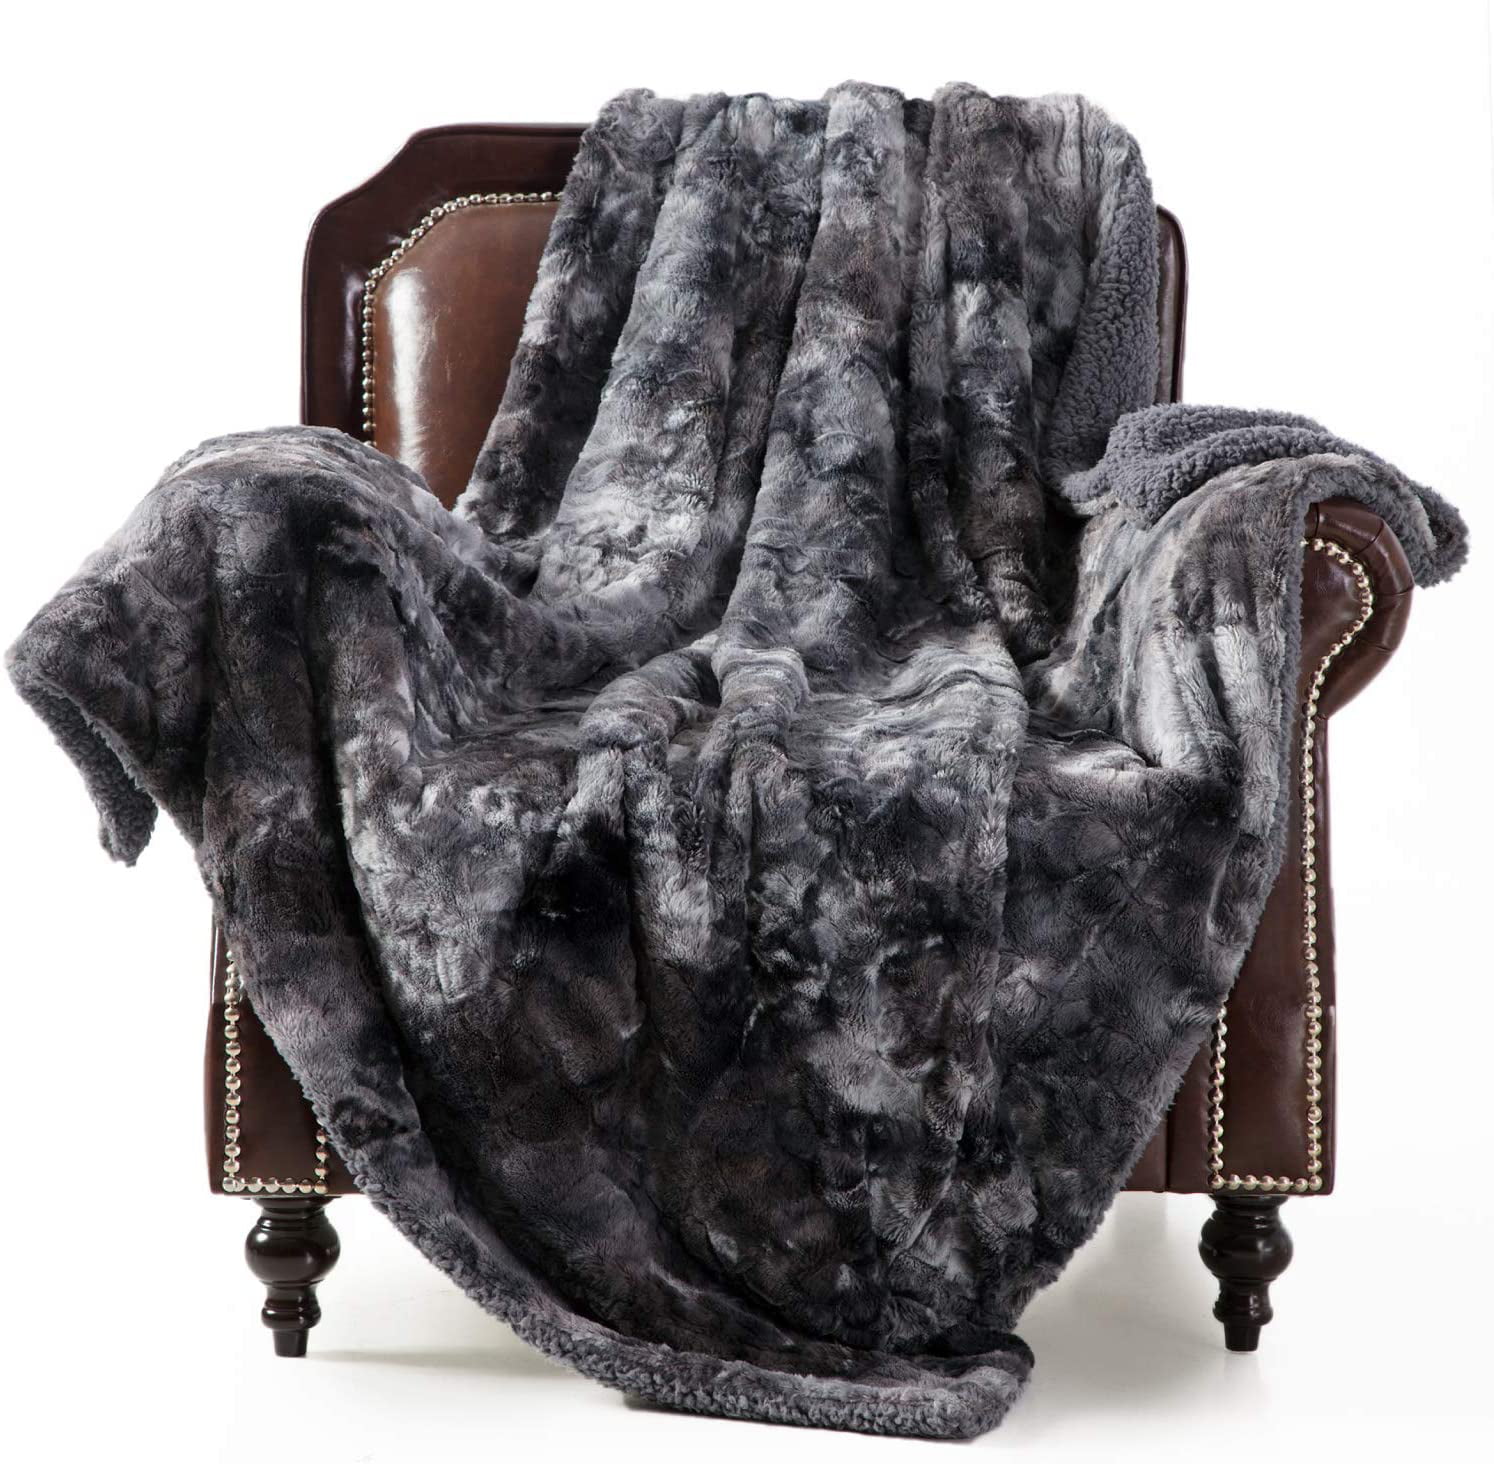 Golden Home Super Soft Fuzzy Faux Fur Reversible Tie-dye Sherpa Throw  Blanket for Sofa, Couch and Bed - Plush Fluffy Fleece Blanket(50x60 inches,  Dark 